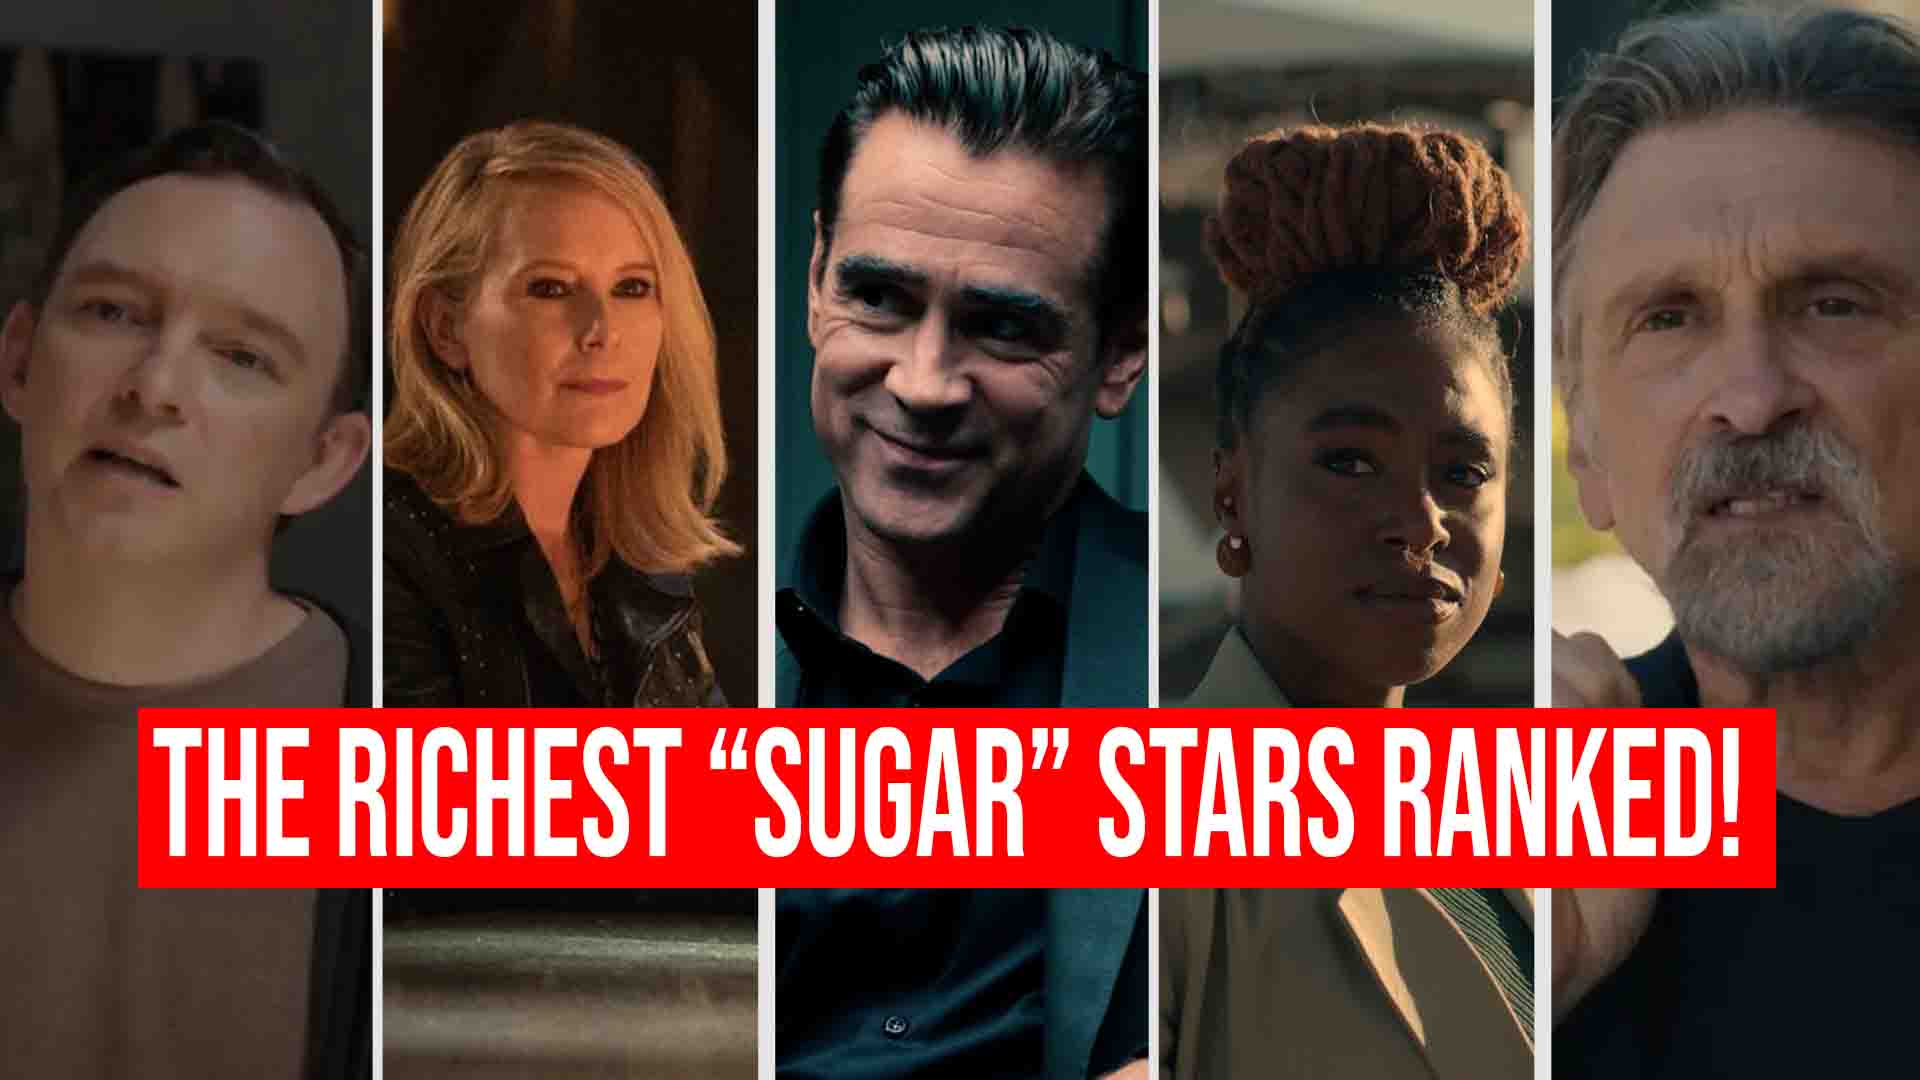 The Richest “Sugar” Stars Ranked From Lowest To Highest